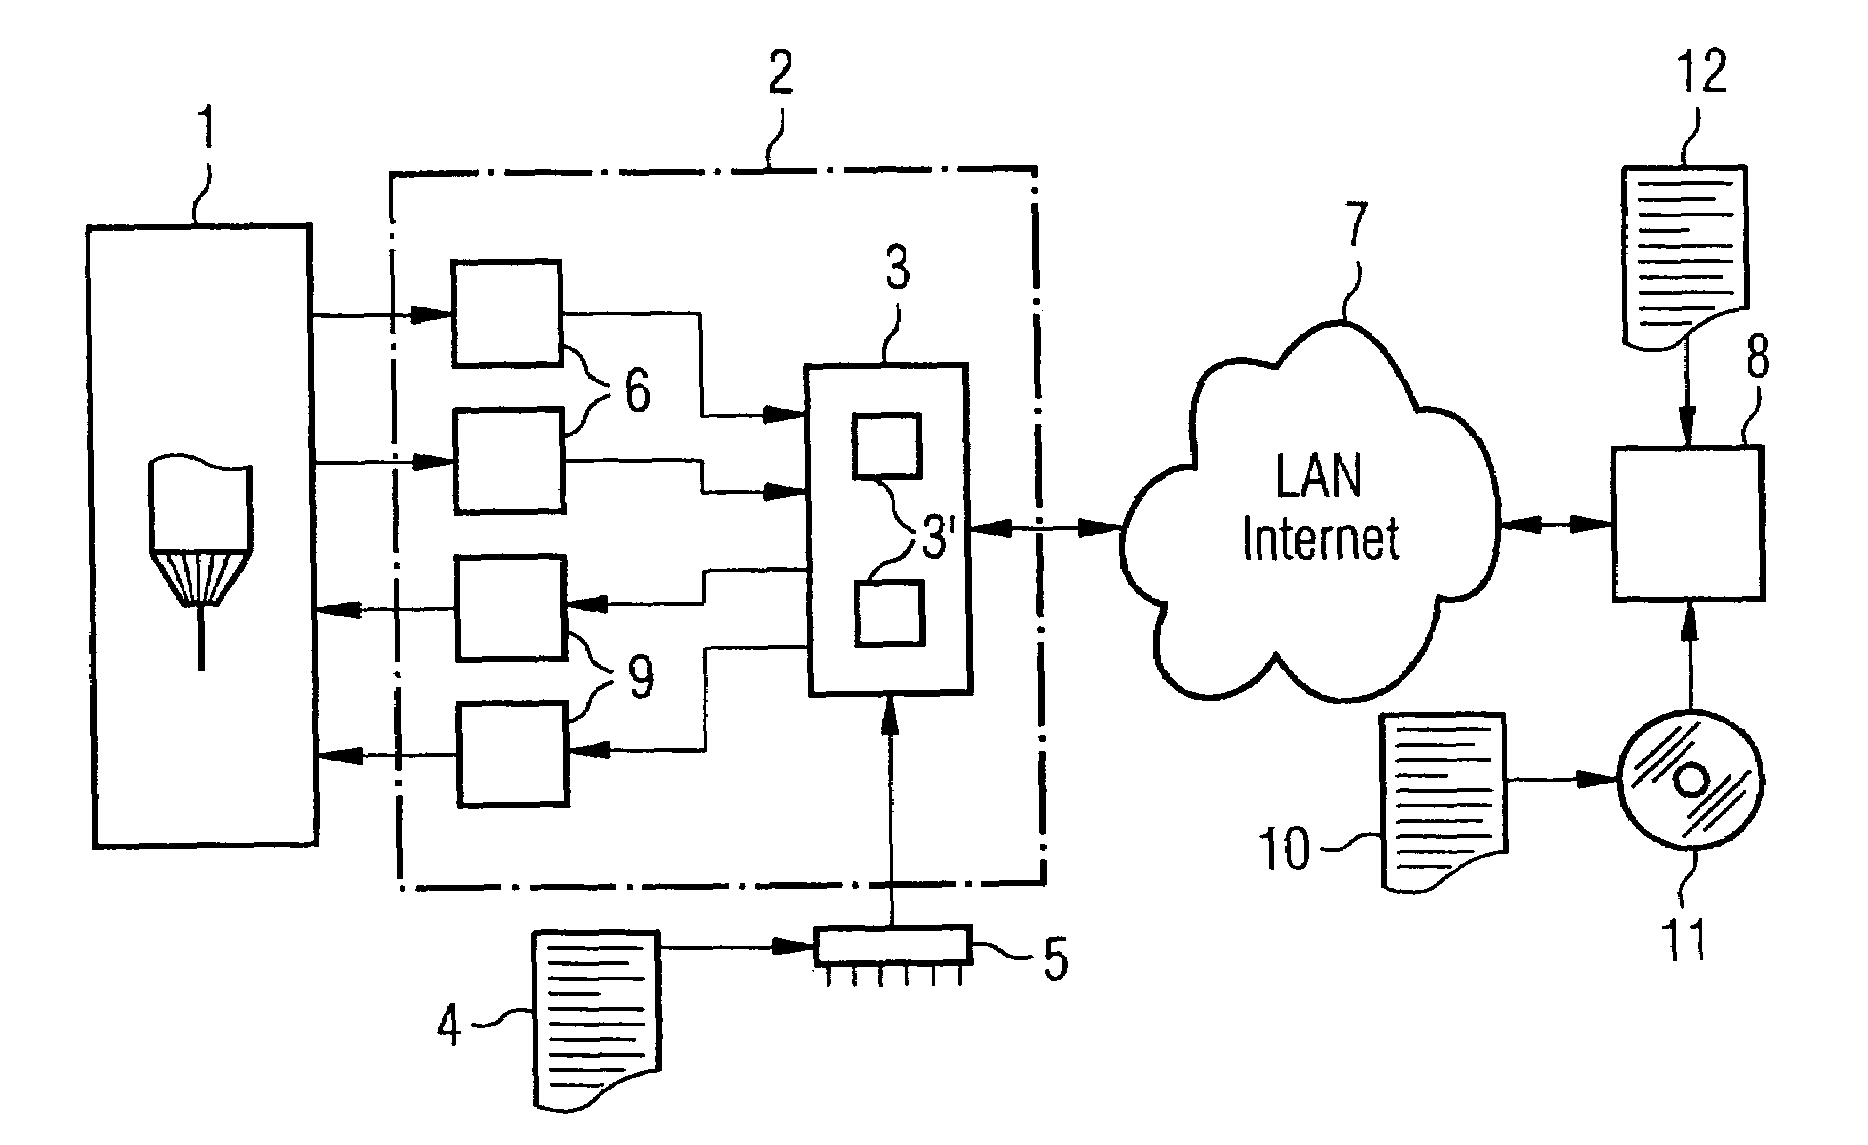 Real-time control process for a controller of an industrial technical process, and a real-time operating process for a computing device